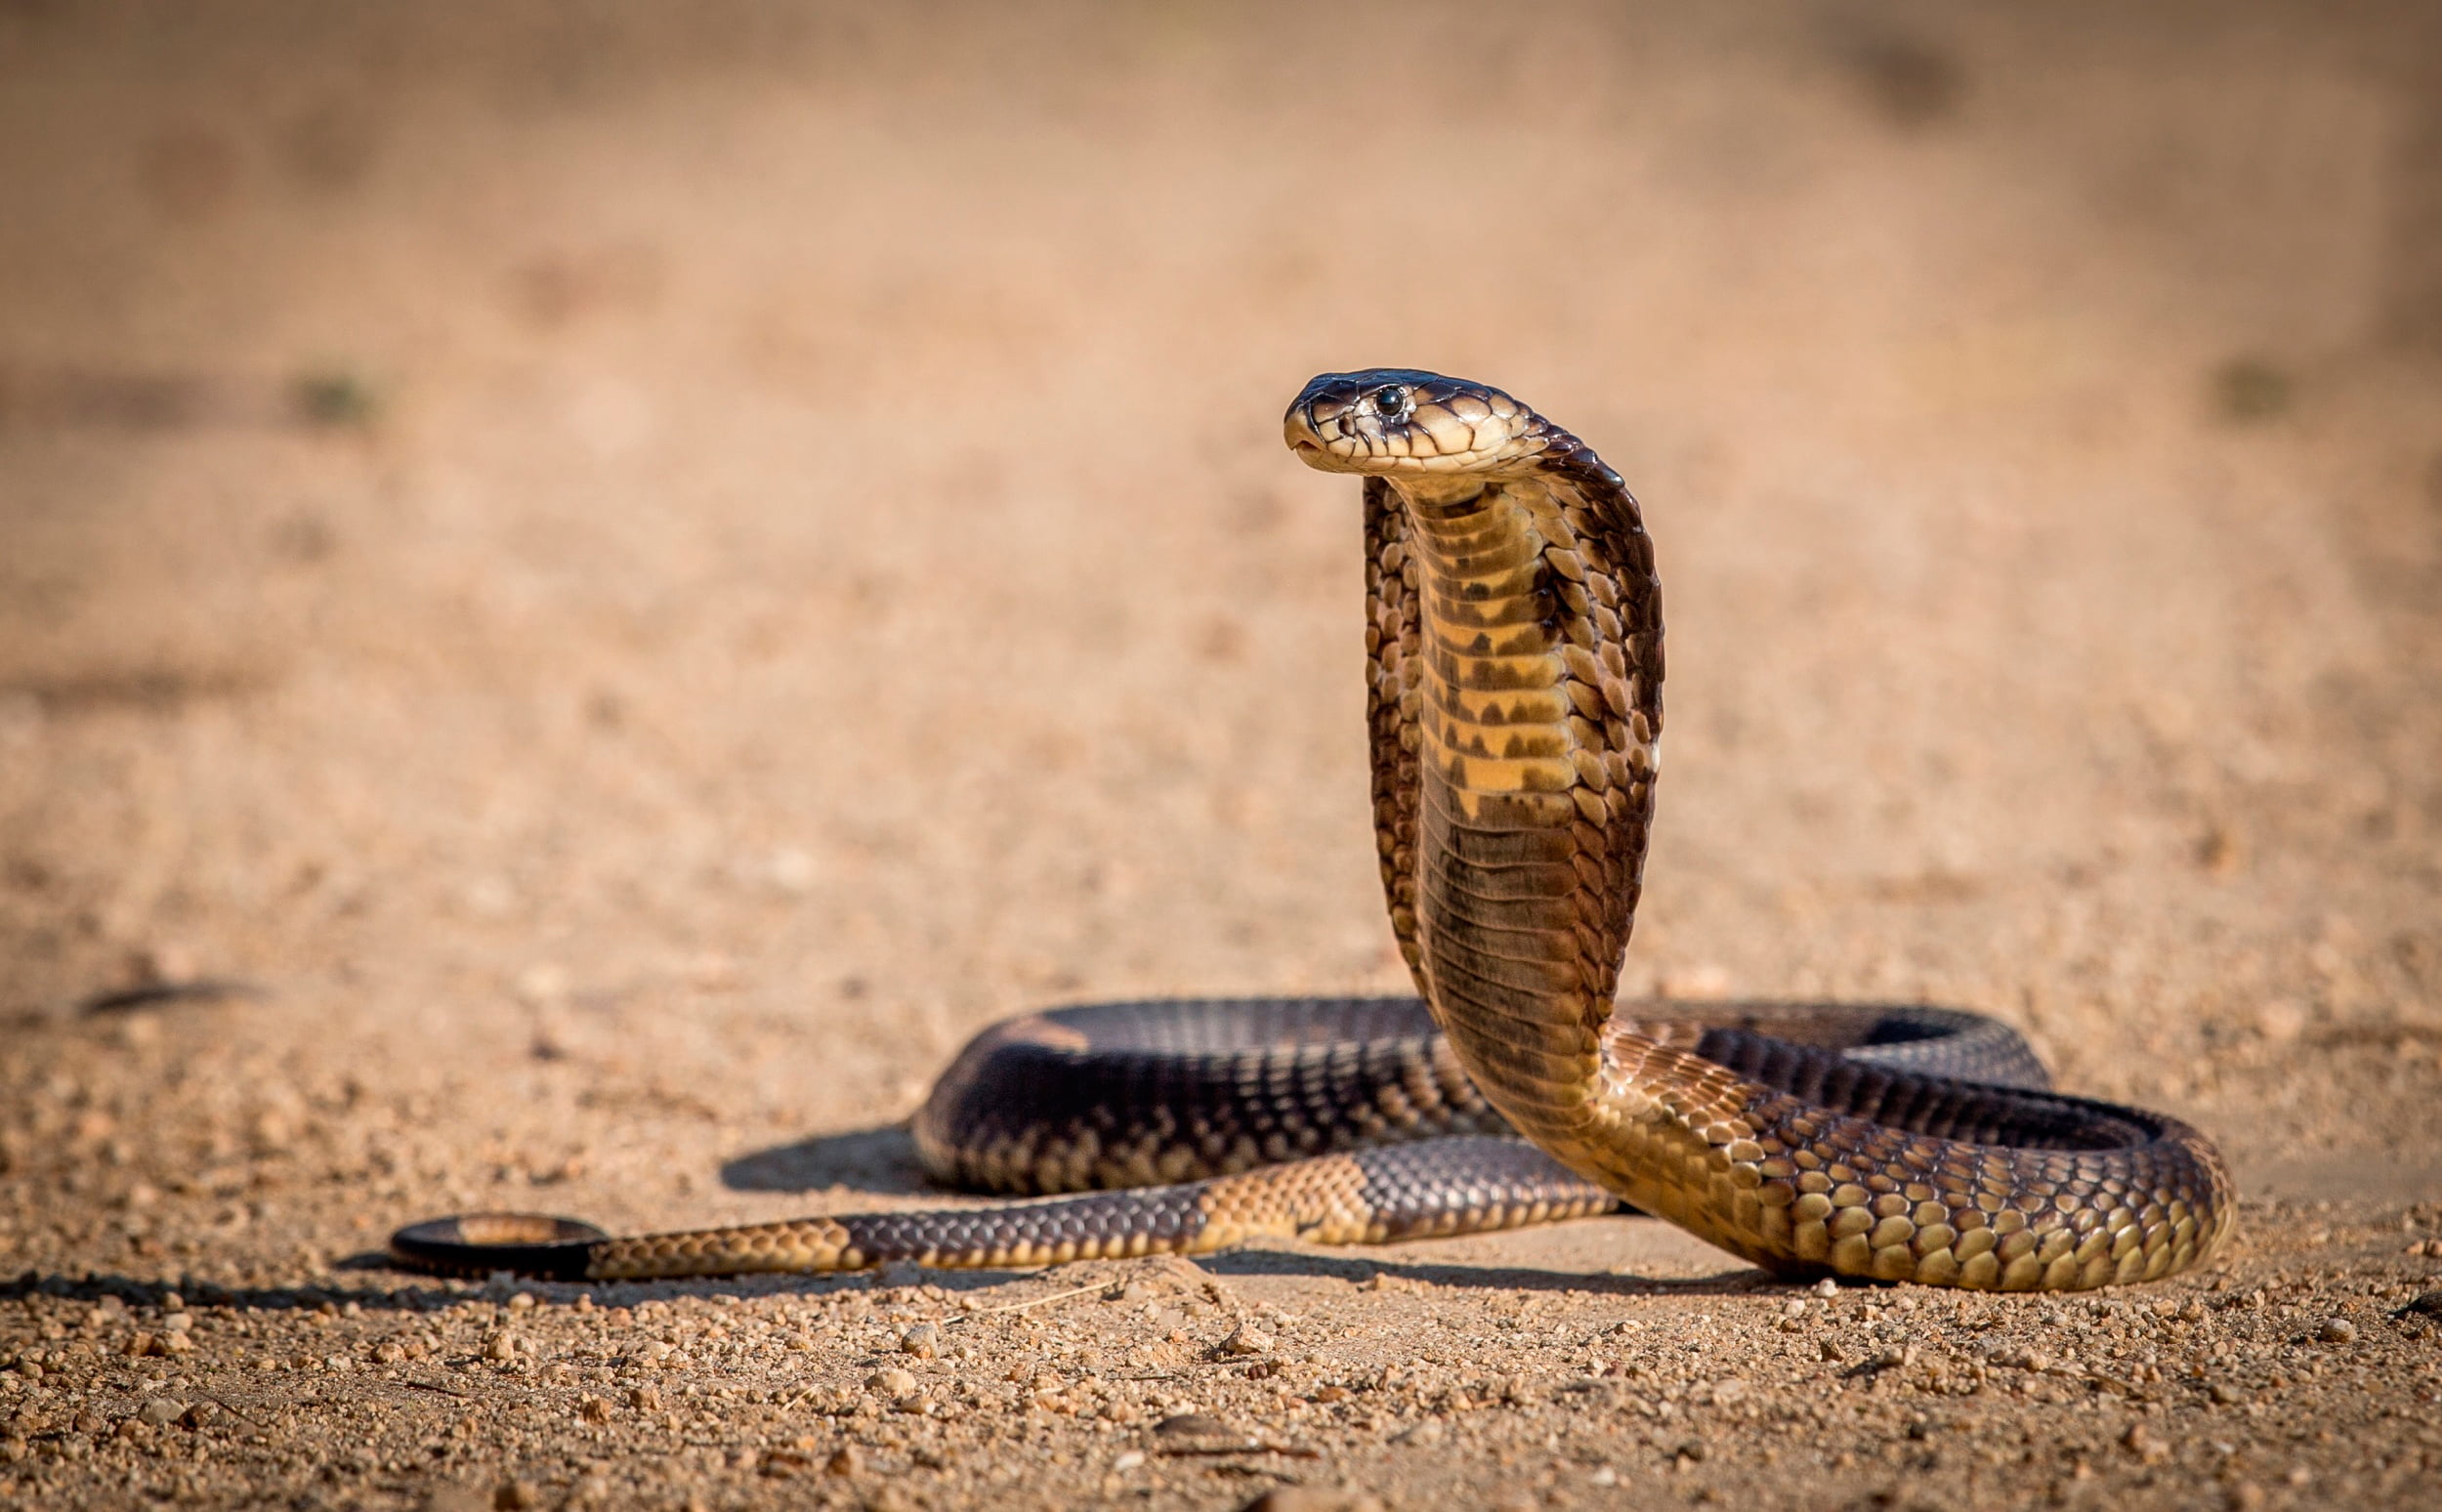 King cobra, snake, position, before the attack, reptile, animal